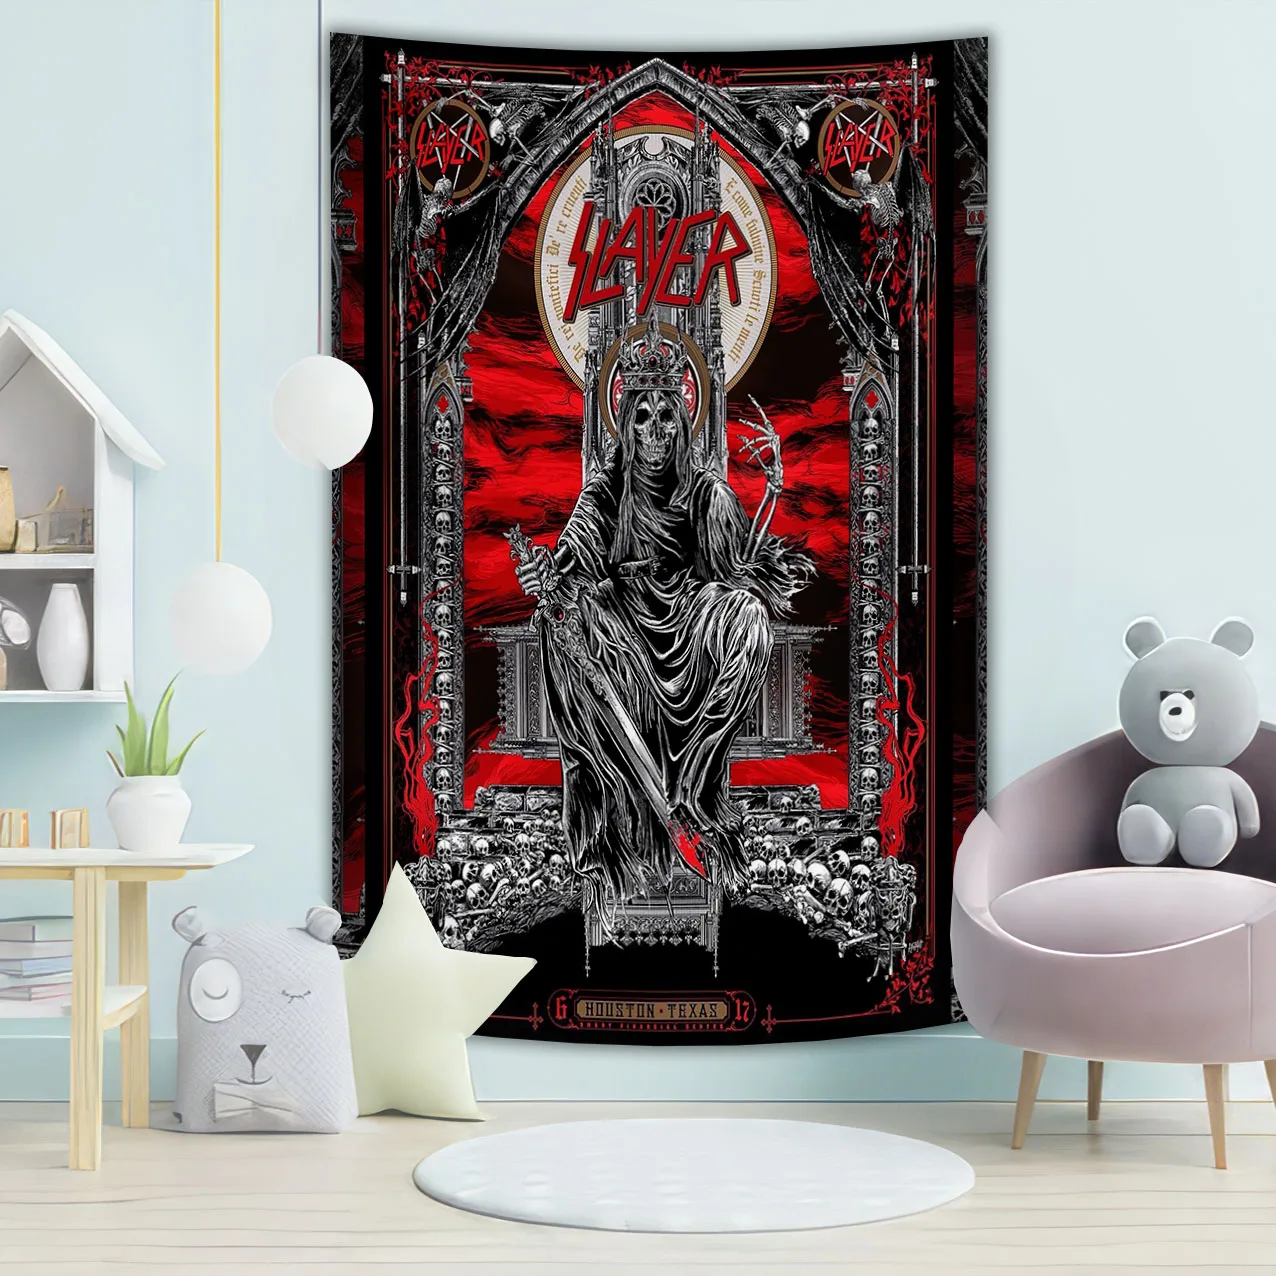 

New Slayers Rock Band Reign In Blood Hot Aesthetic Hang Decorations On Room Or Club Walls Tapestry Banner Flag